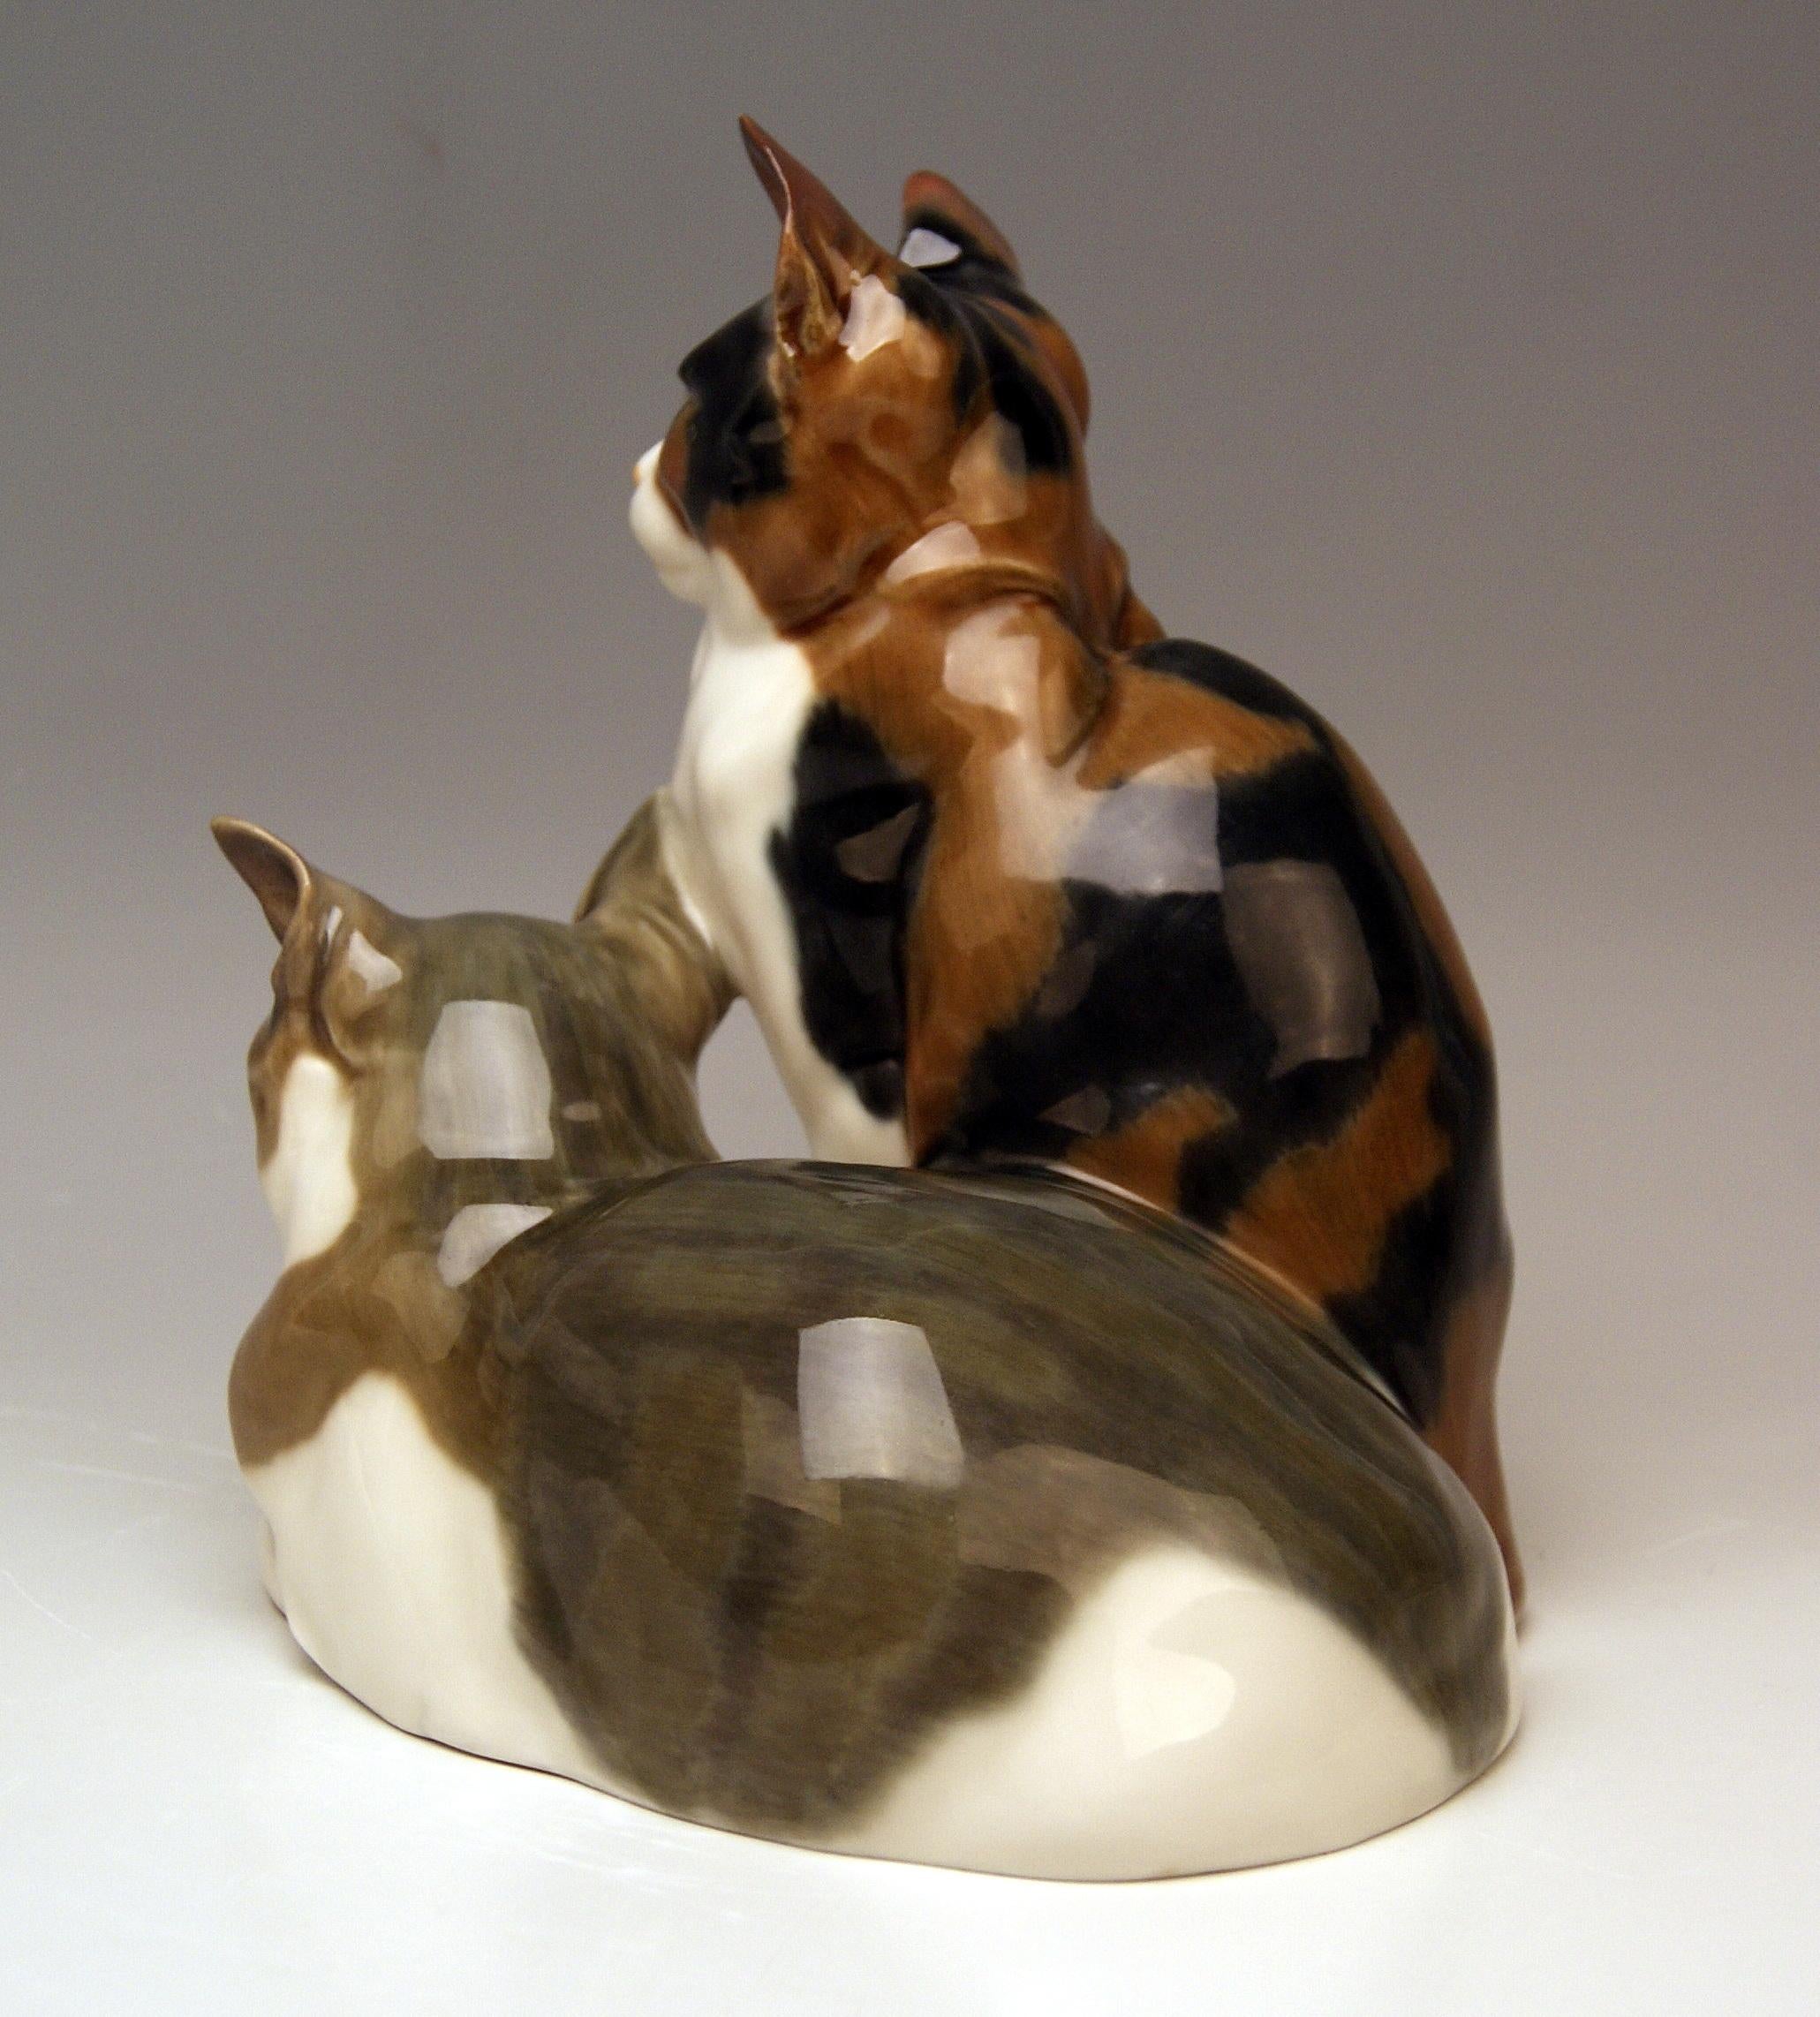 Art Nouveau Meissen Pair of Lovely Animals Domestic Cats by Otto Pilz Model H 103 c. 1906-10